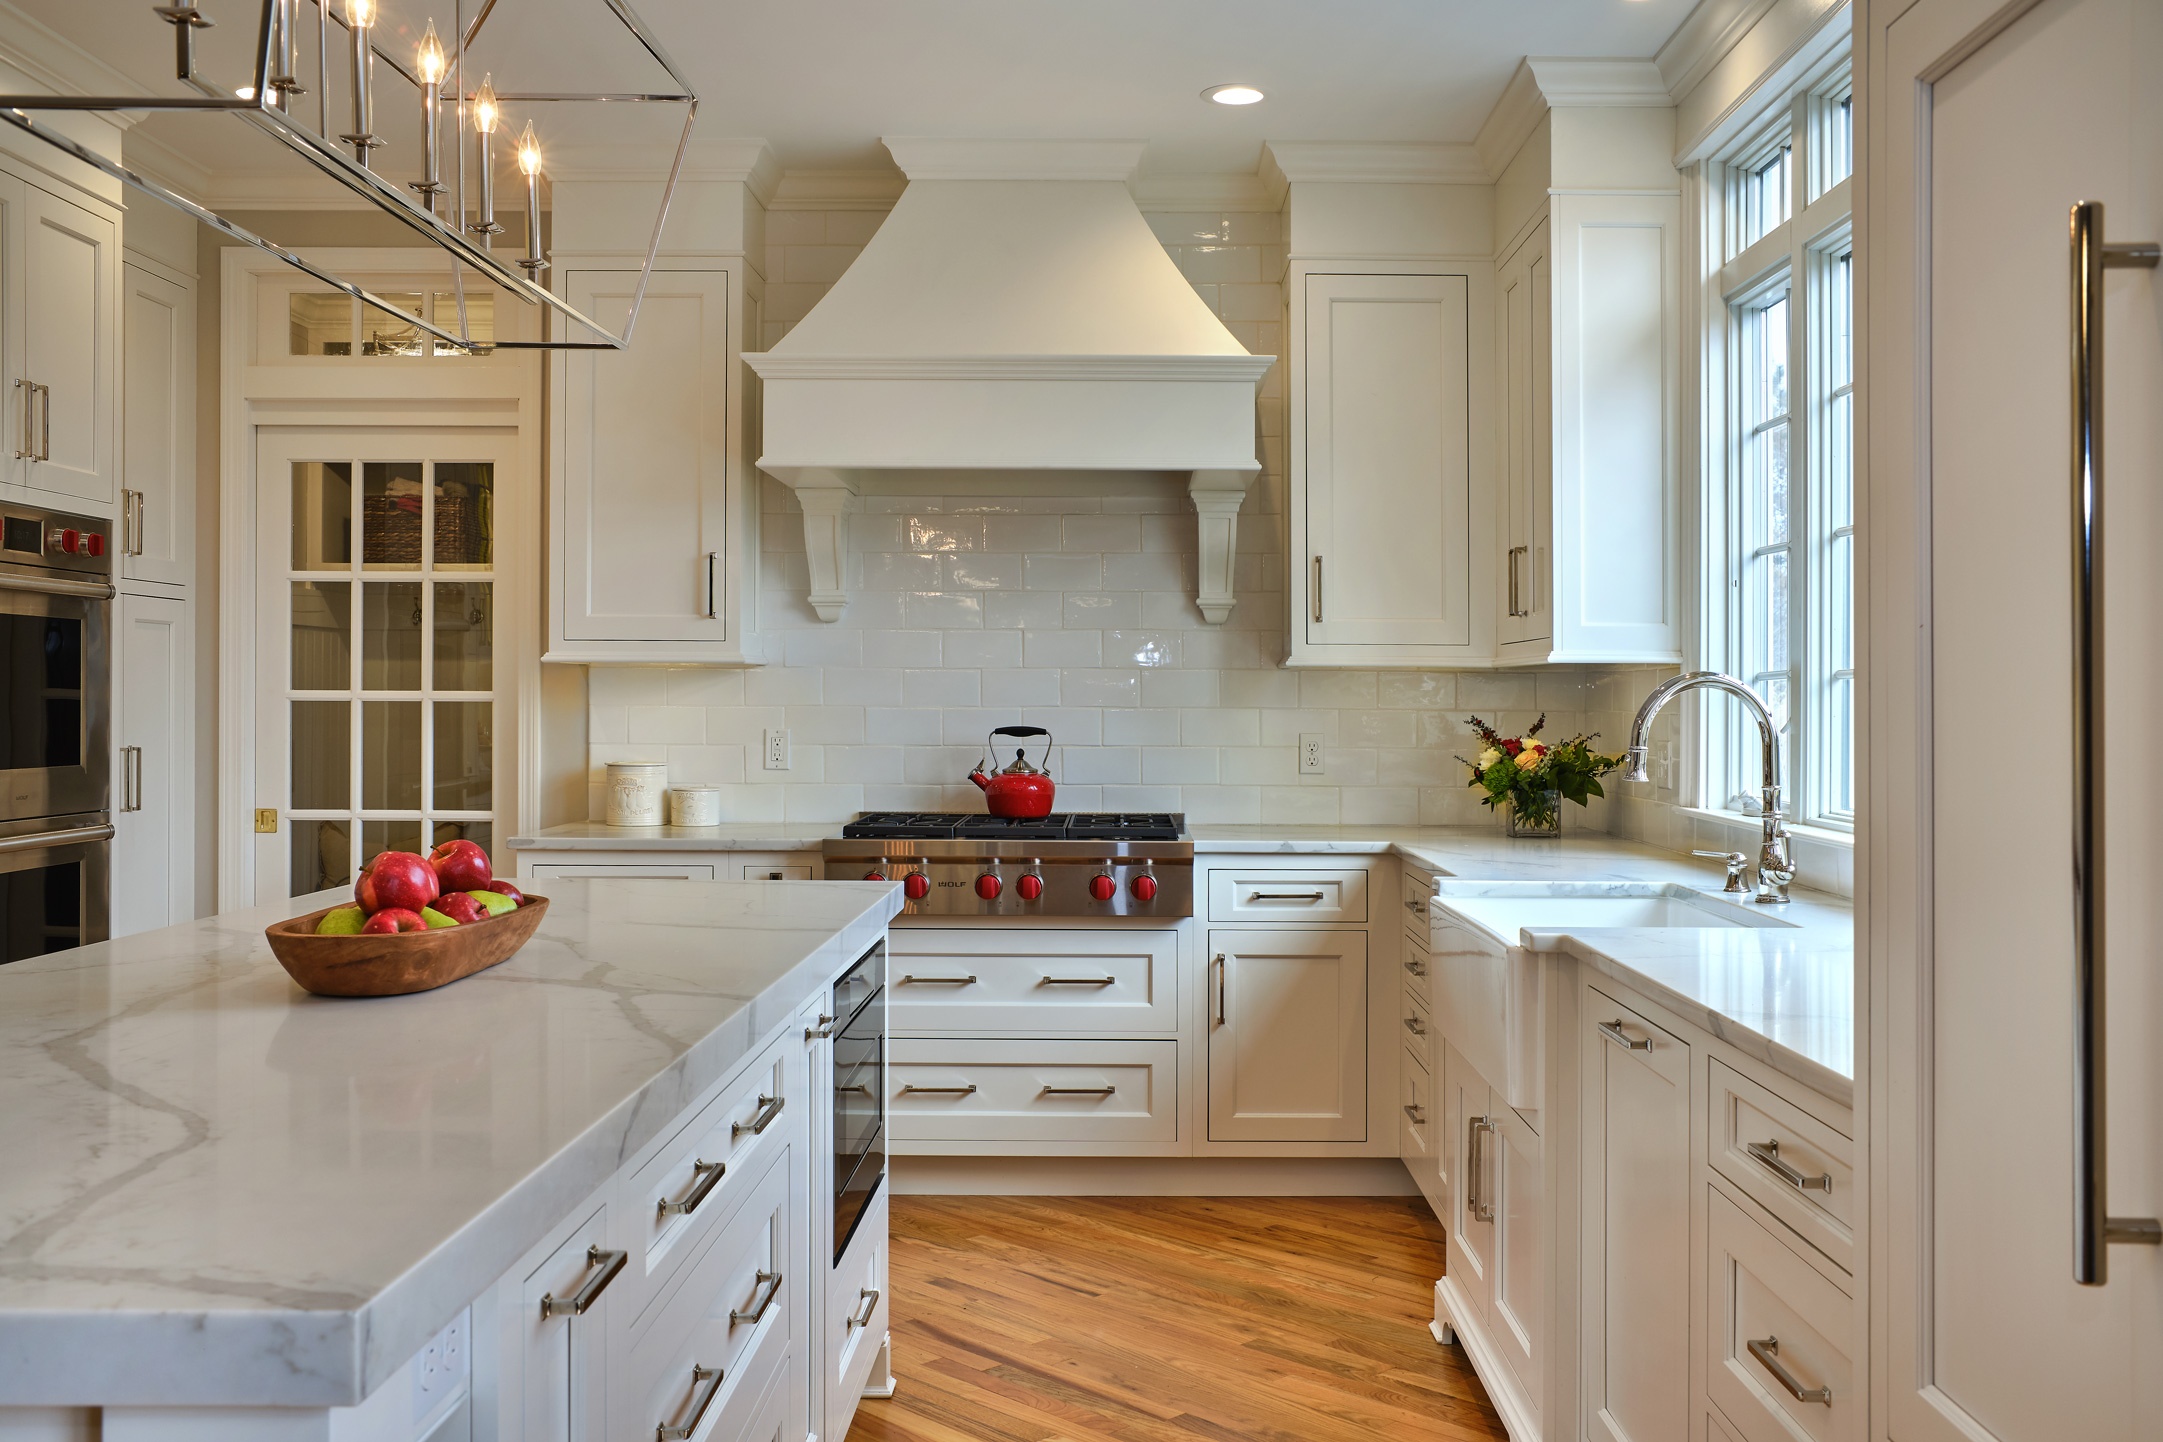 Tranquil Classic Kitchen Design in Milford CT The 